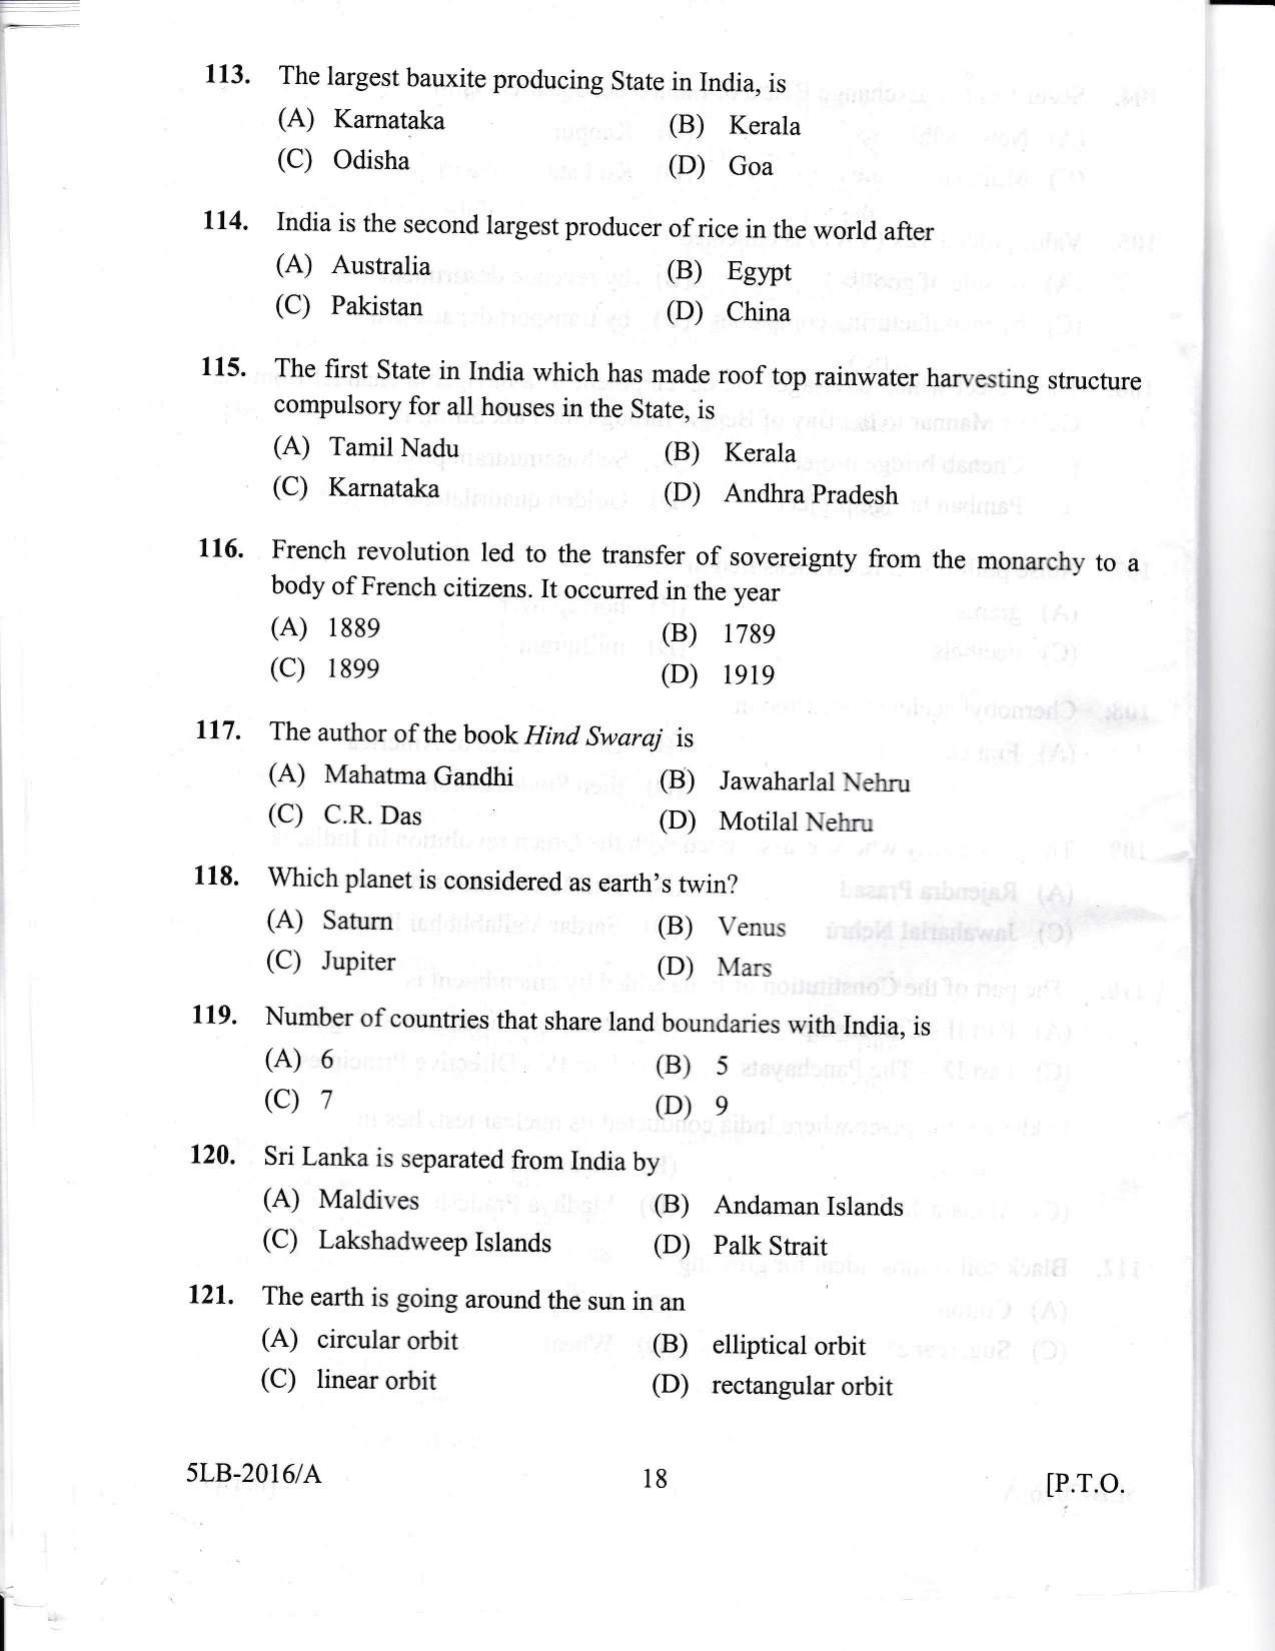 KLEE 5 Year LLB Exam 2016 Question Paper - Page 18